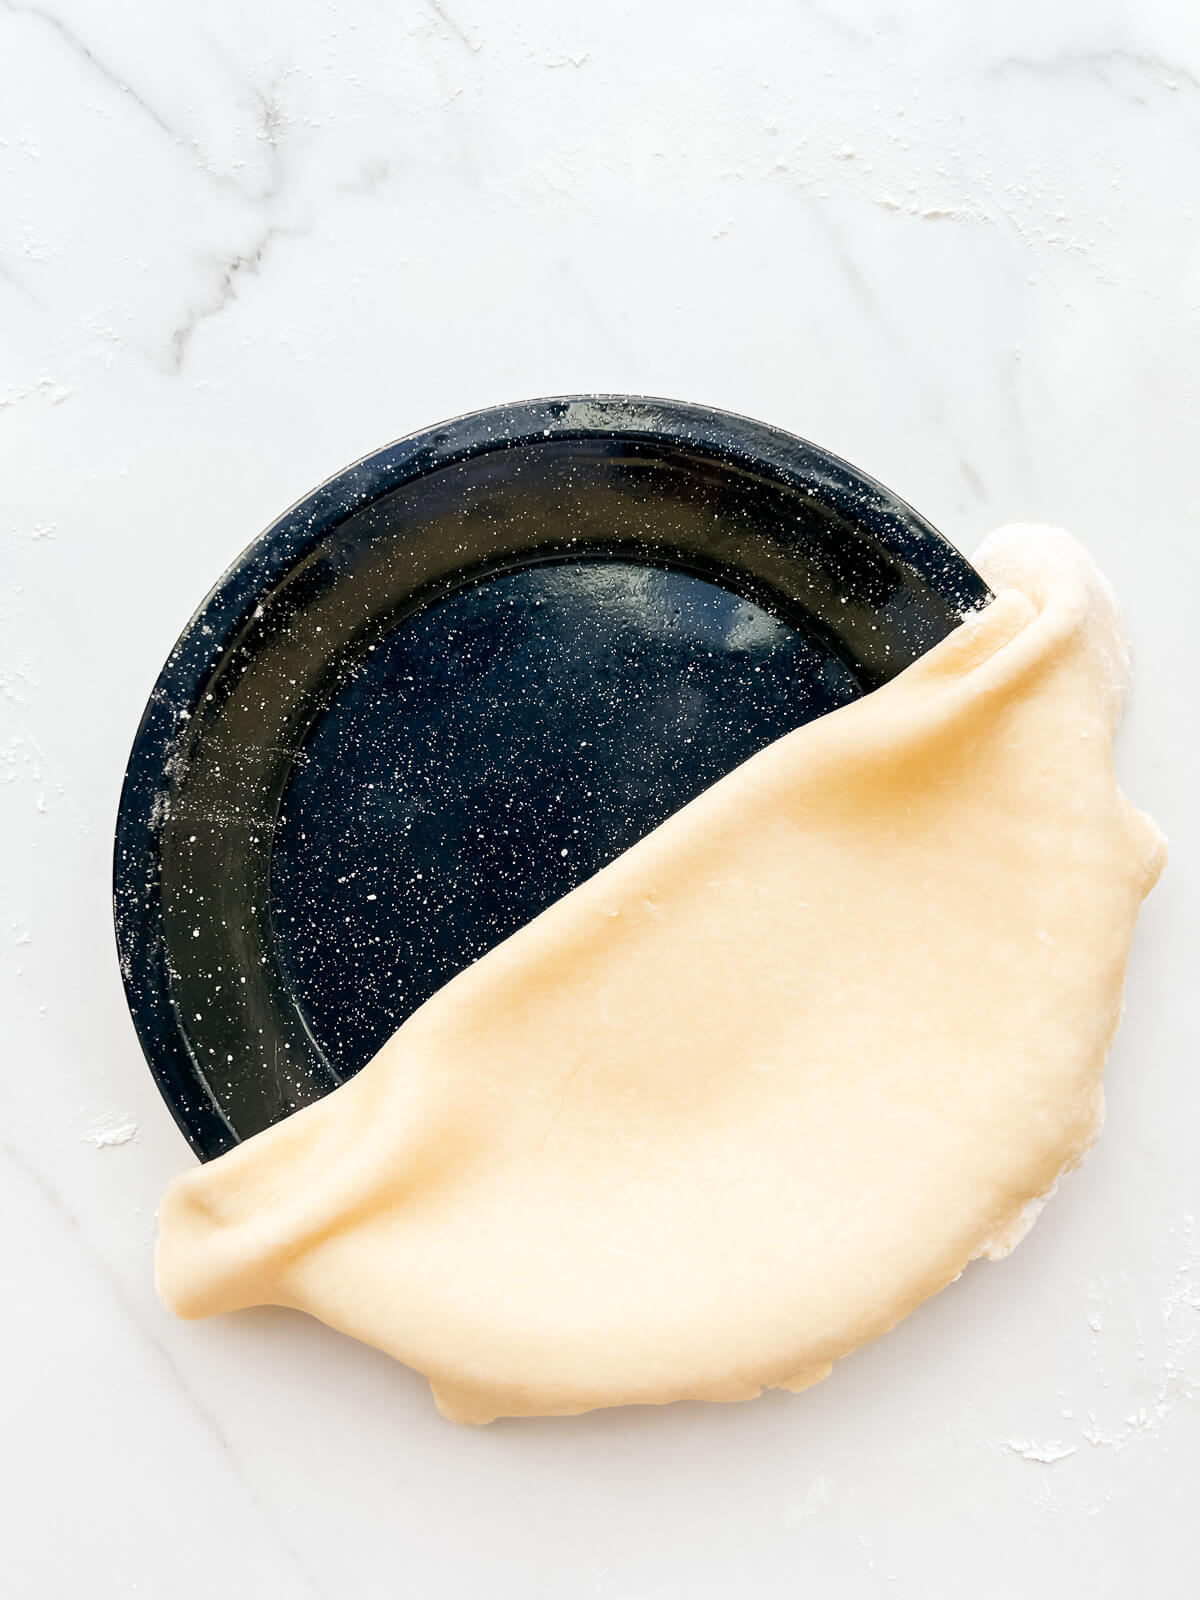 Lining a pie plate with pie dough, unfolding the dough across the surface of the plate.